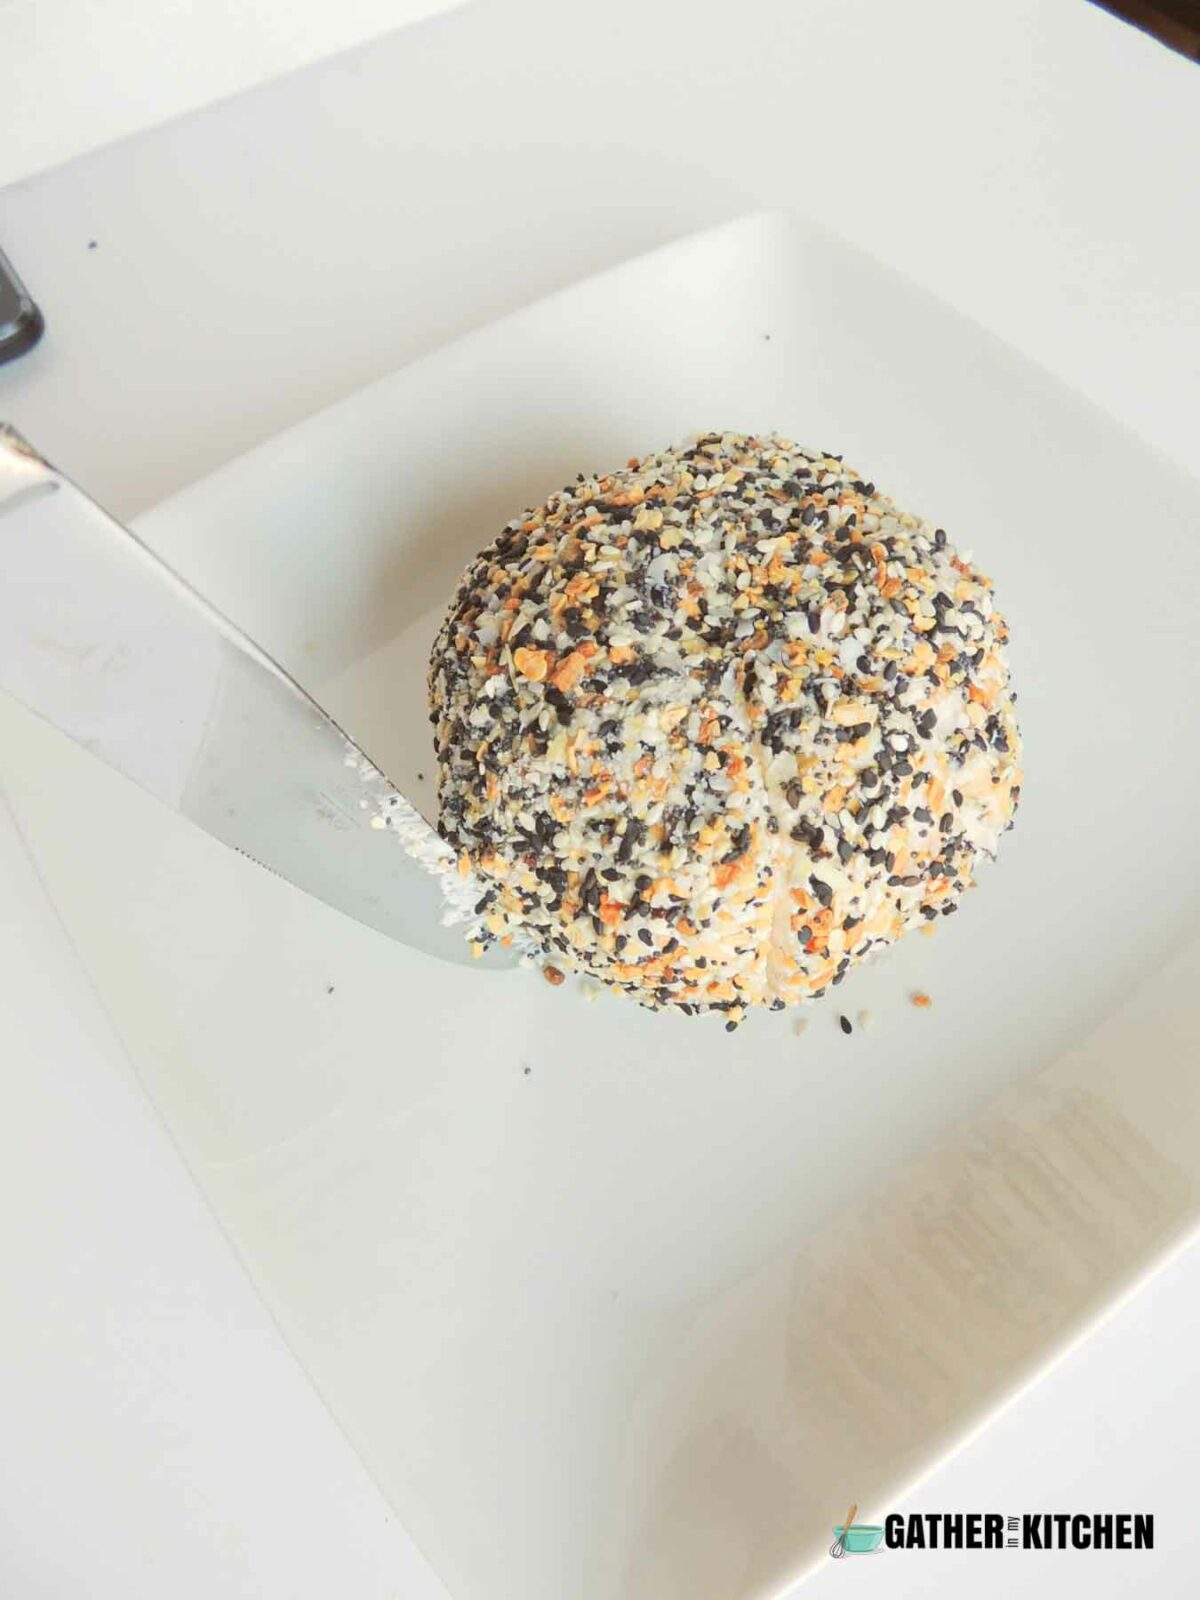 A butter knife being used to score the sides of the pumpkin cheese ball.